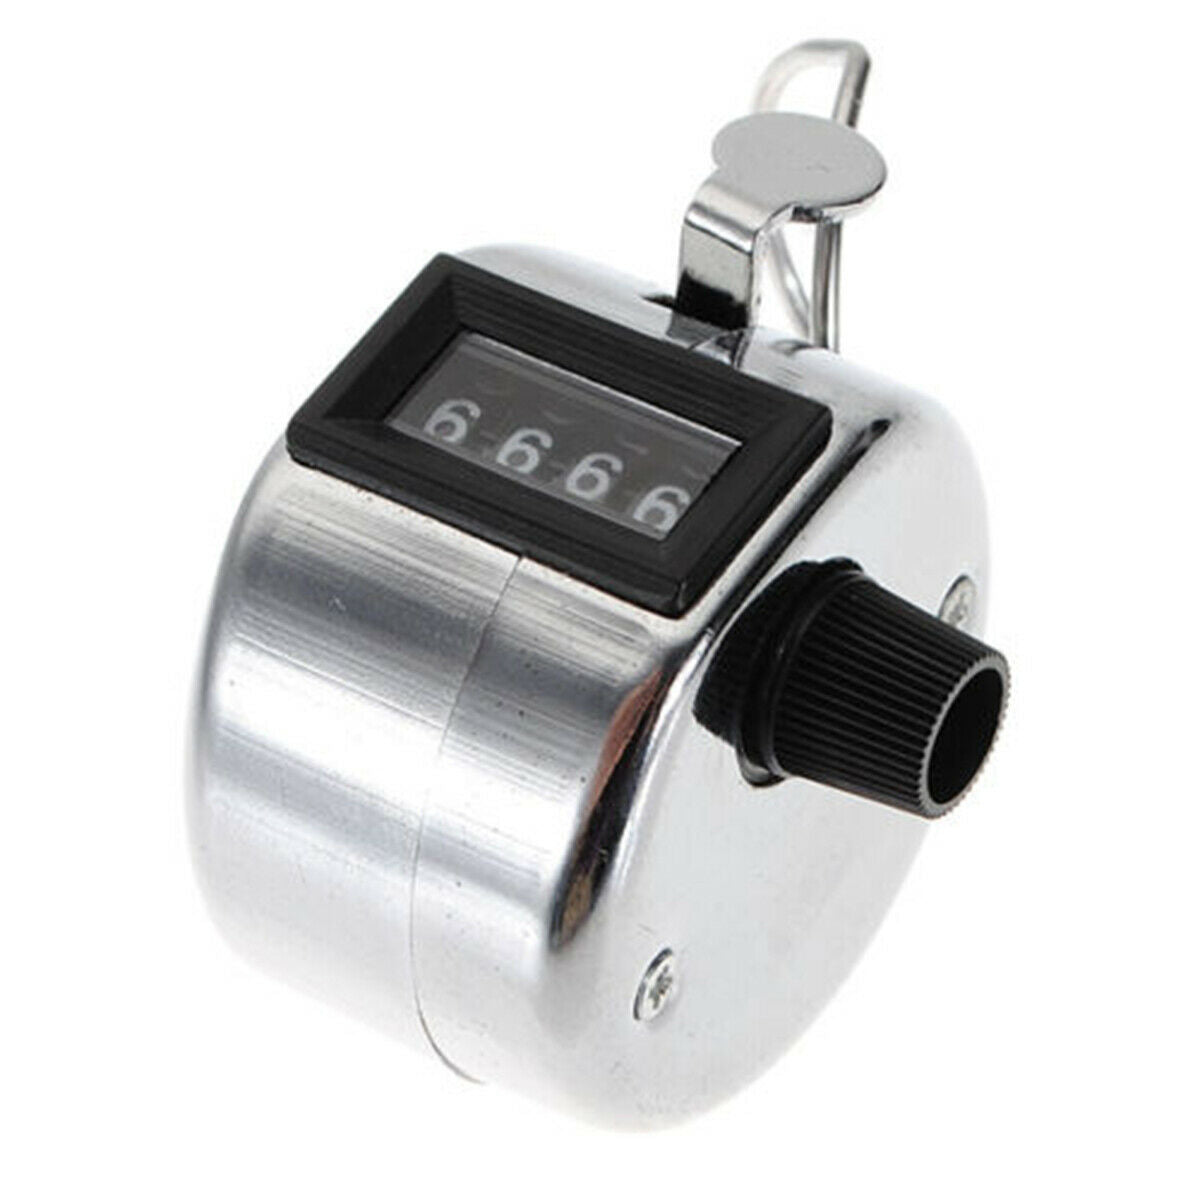 Hand Tally Counter 4-Digit Mechanical Palm Number Clicker With Finger Ring